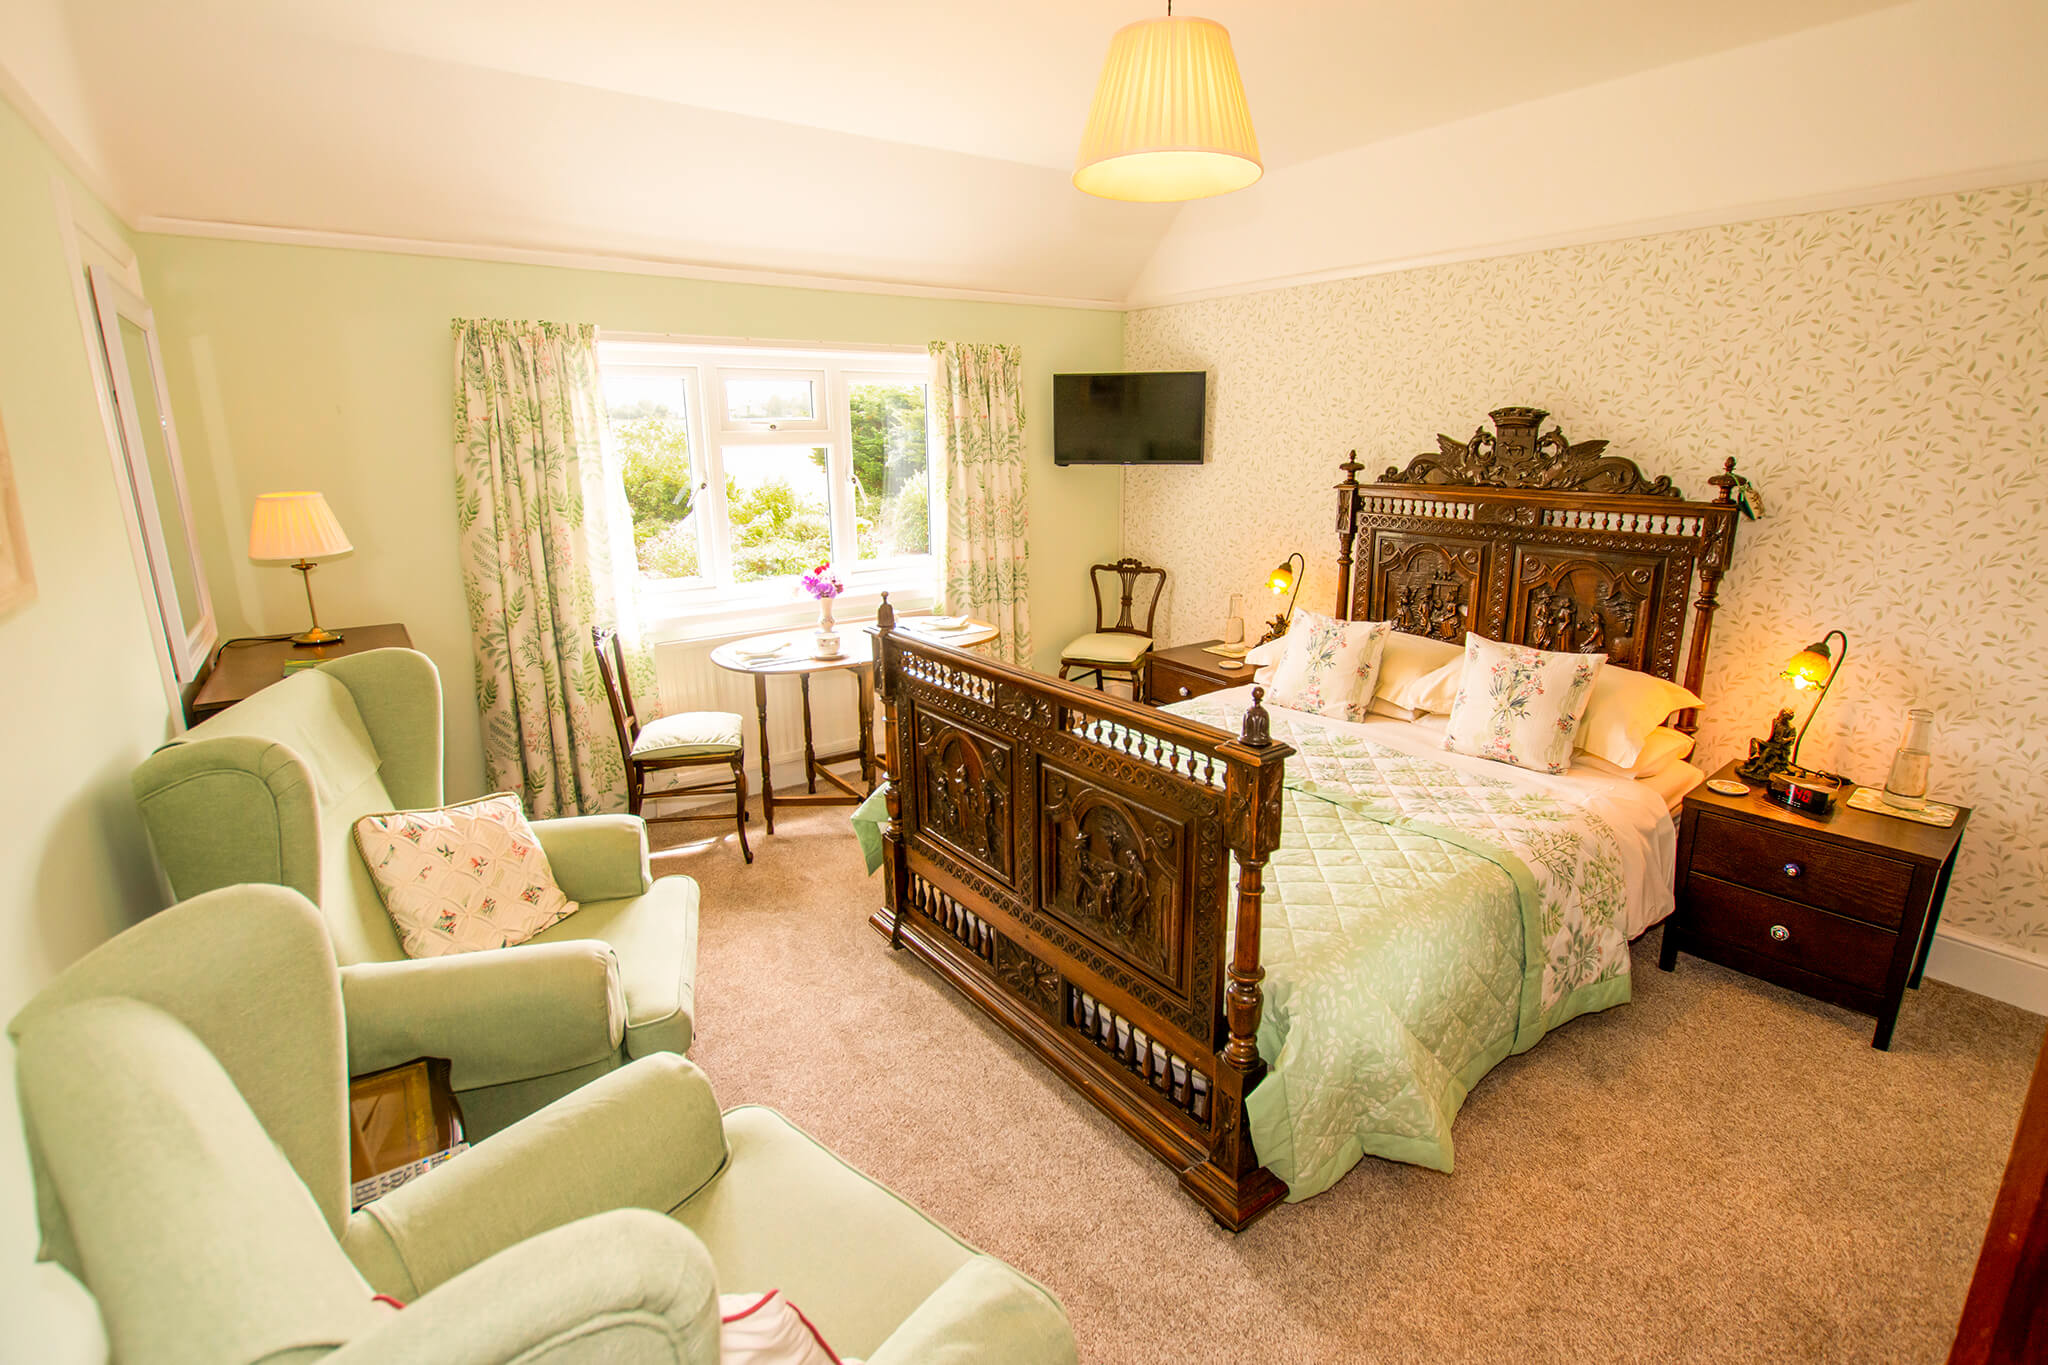 Ford Farm House Bed and Breakfast Guest Room - Isle of Wight